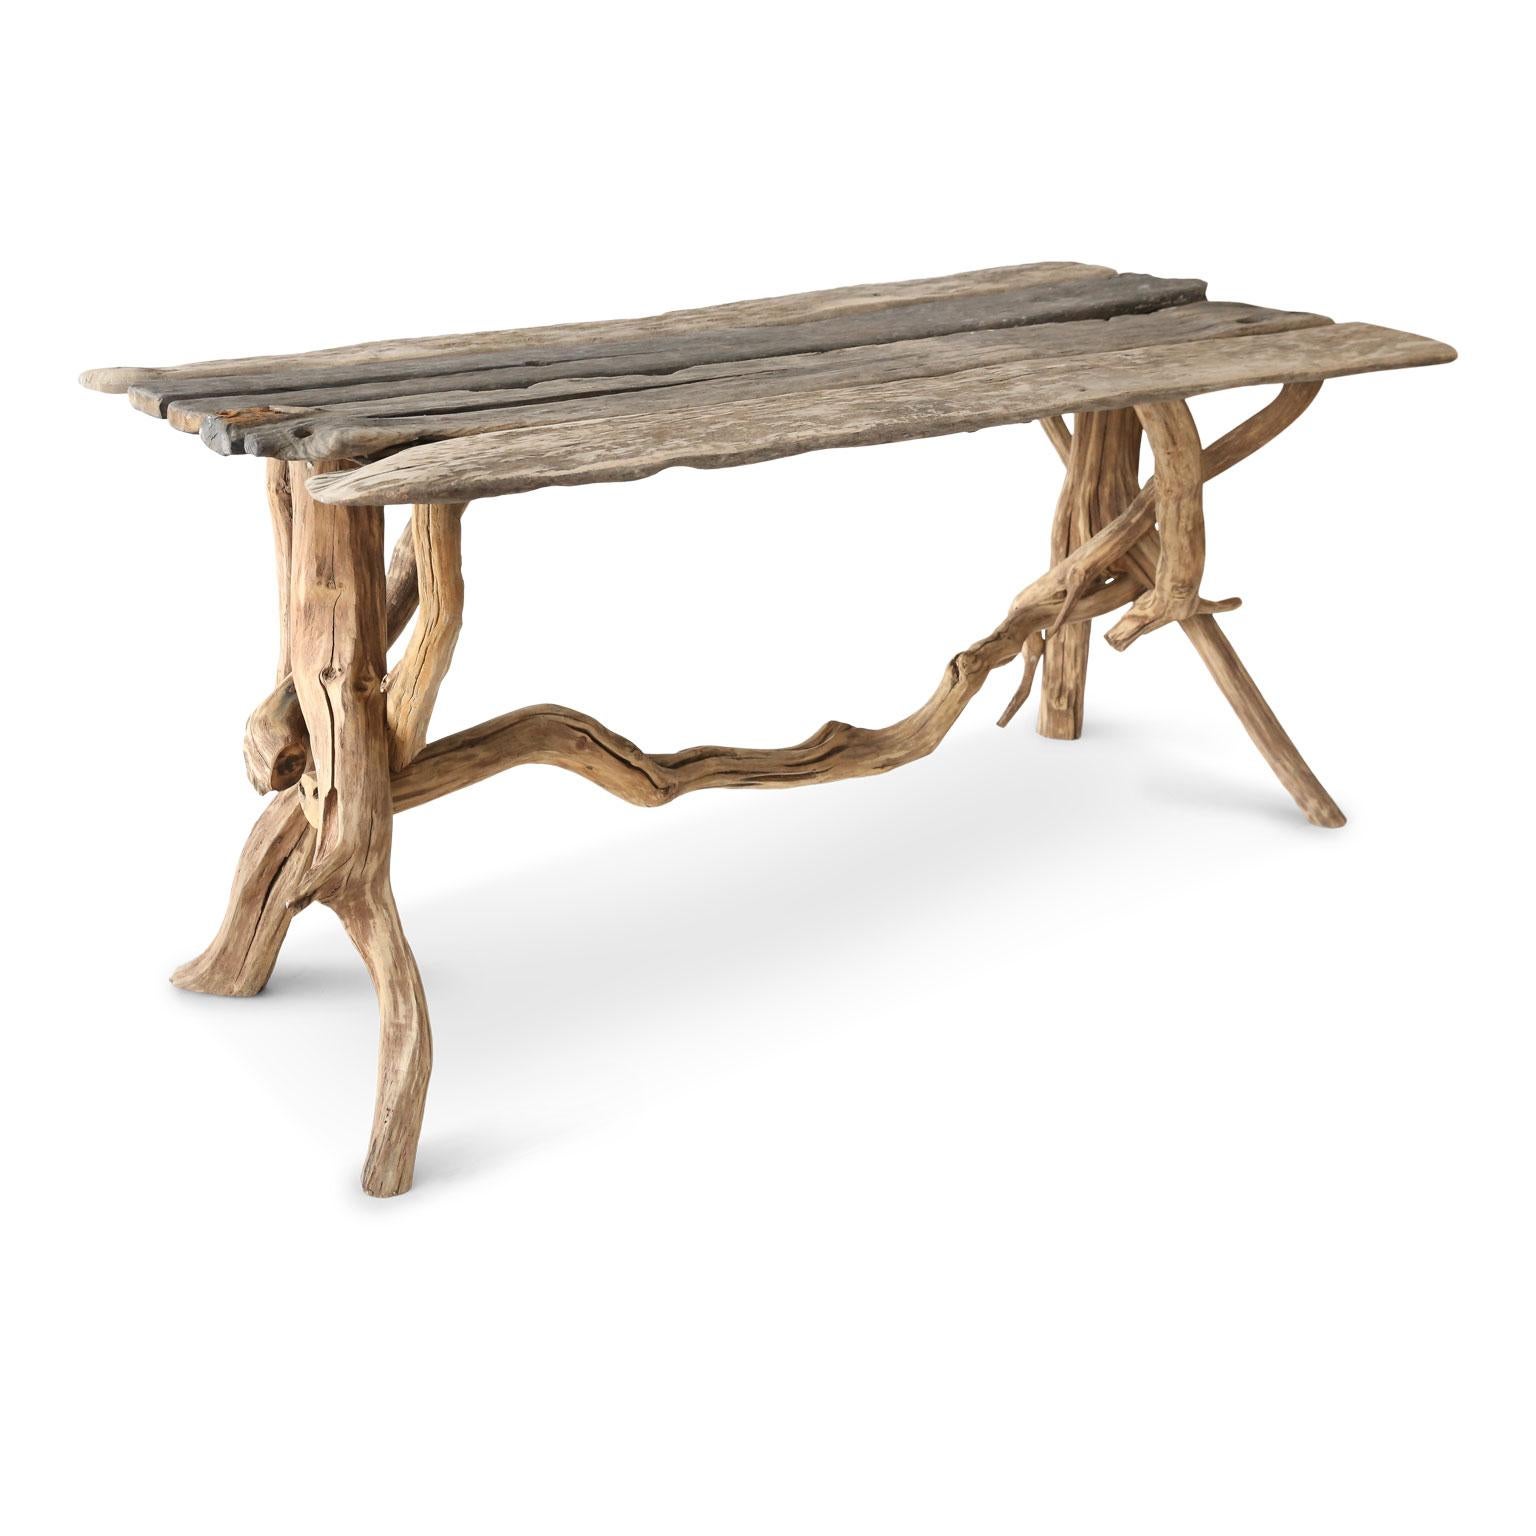 Driftwood table constructed with a graceful, natural-shaped trestle base supporting a rectangular top of naturally weathered antique planks.